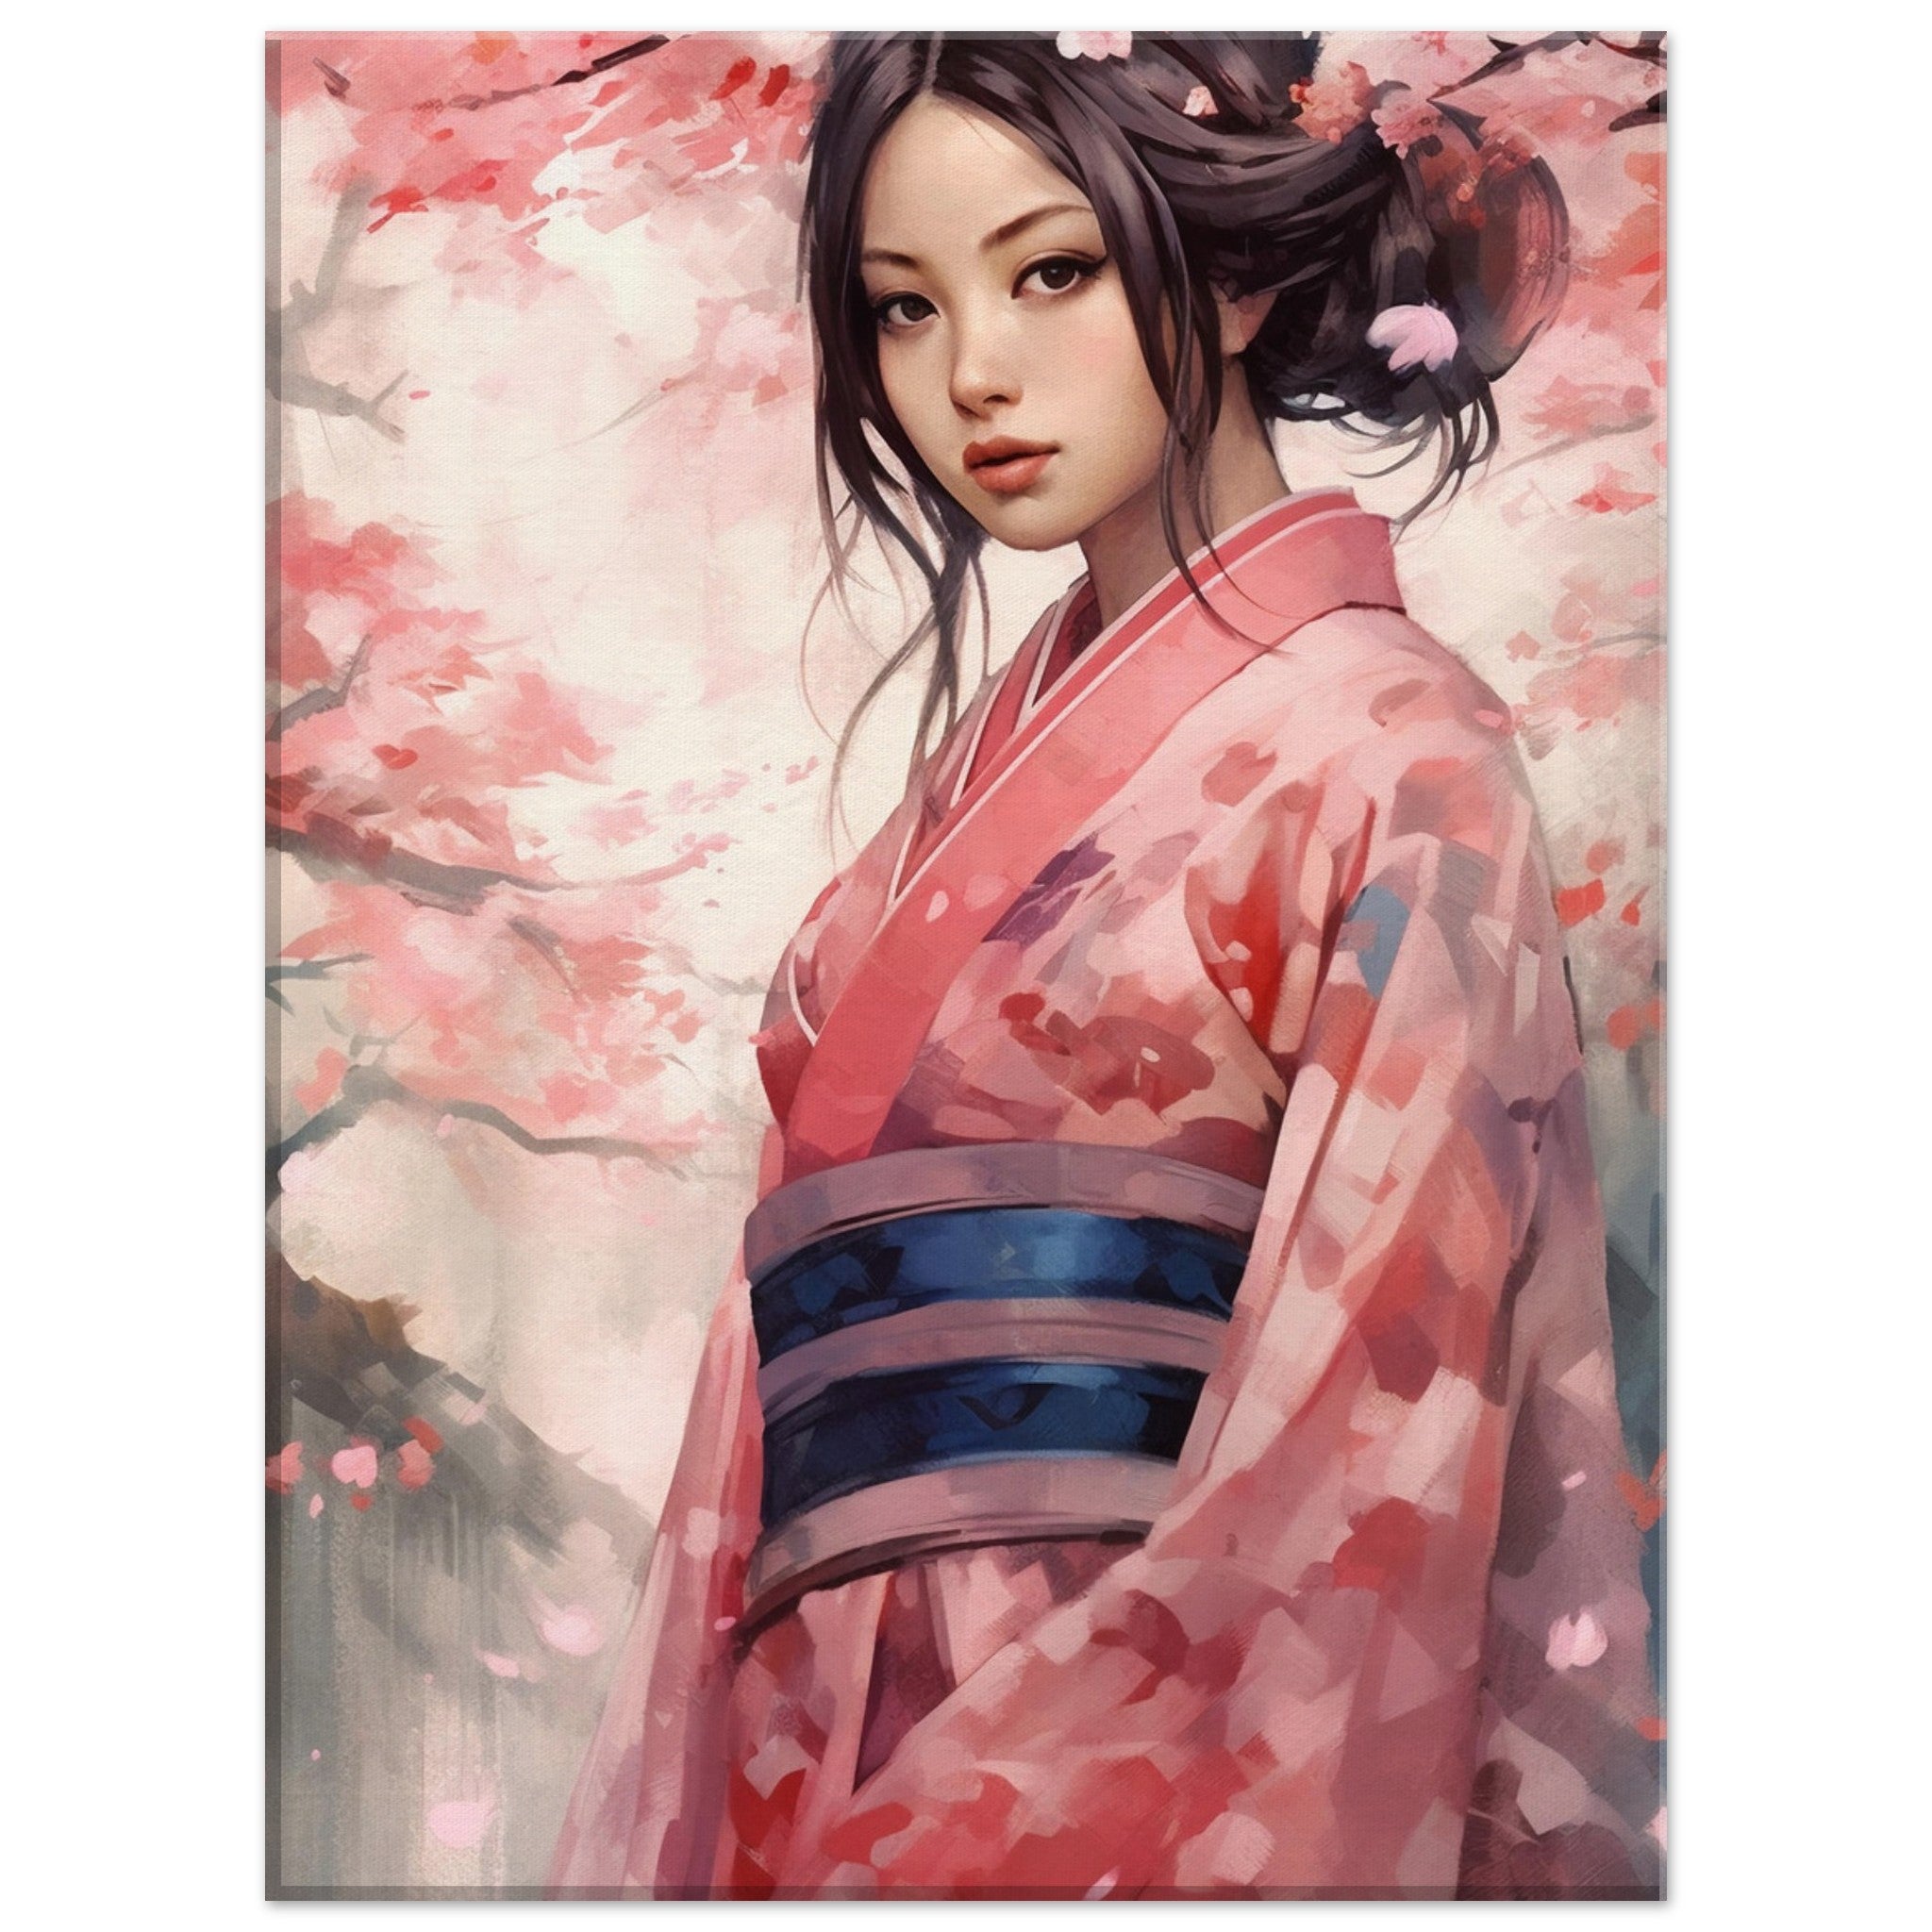 Japanese girl surrounded with cherry blossoms - immersiarts